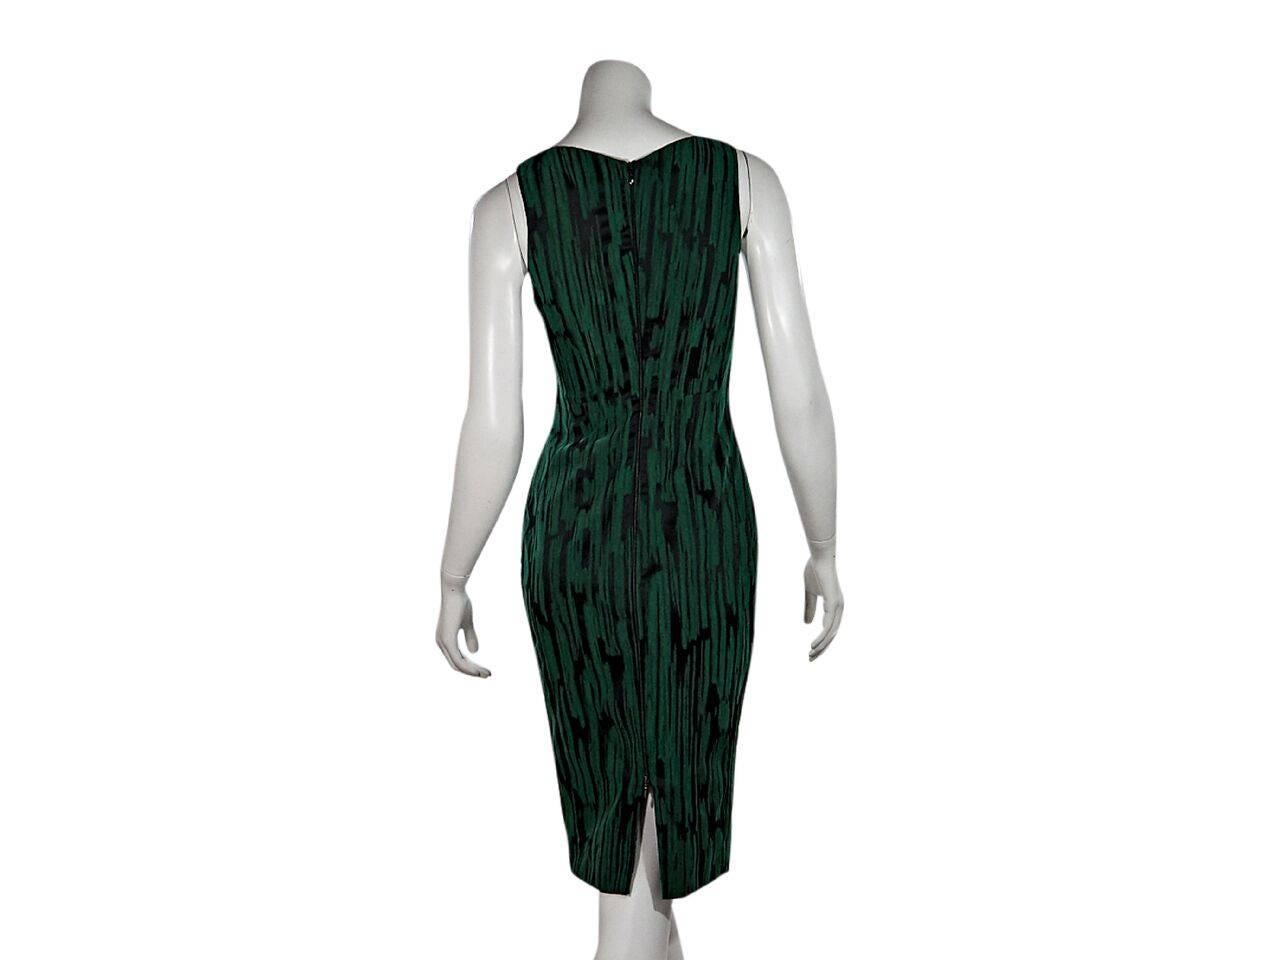 Product details:  Green and black printed sheath dress by Antonio Berardi.  Squareneck.  Sleeveless.  Exposed back zip closure.  Center back hem vent.  Label size IT 40.
Condition: Pre-owned. Very good.
Est. Retail $ 498.00